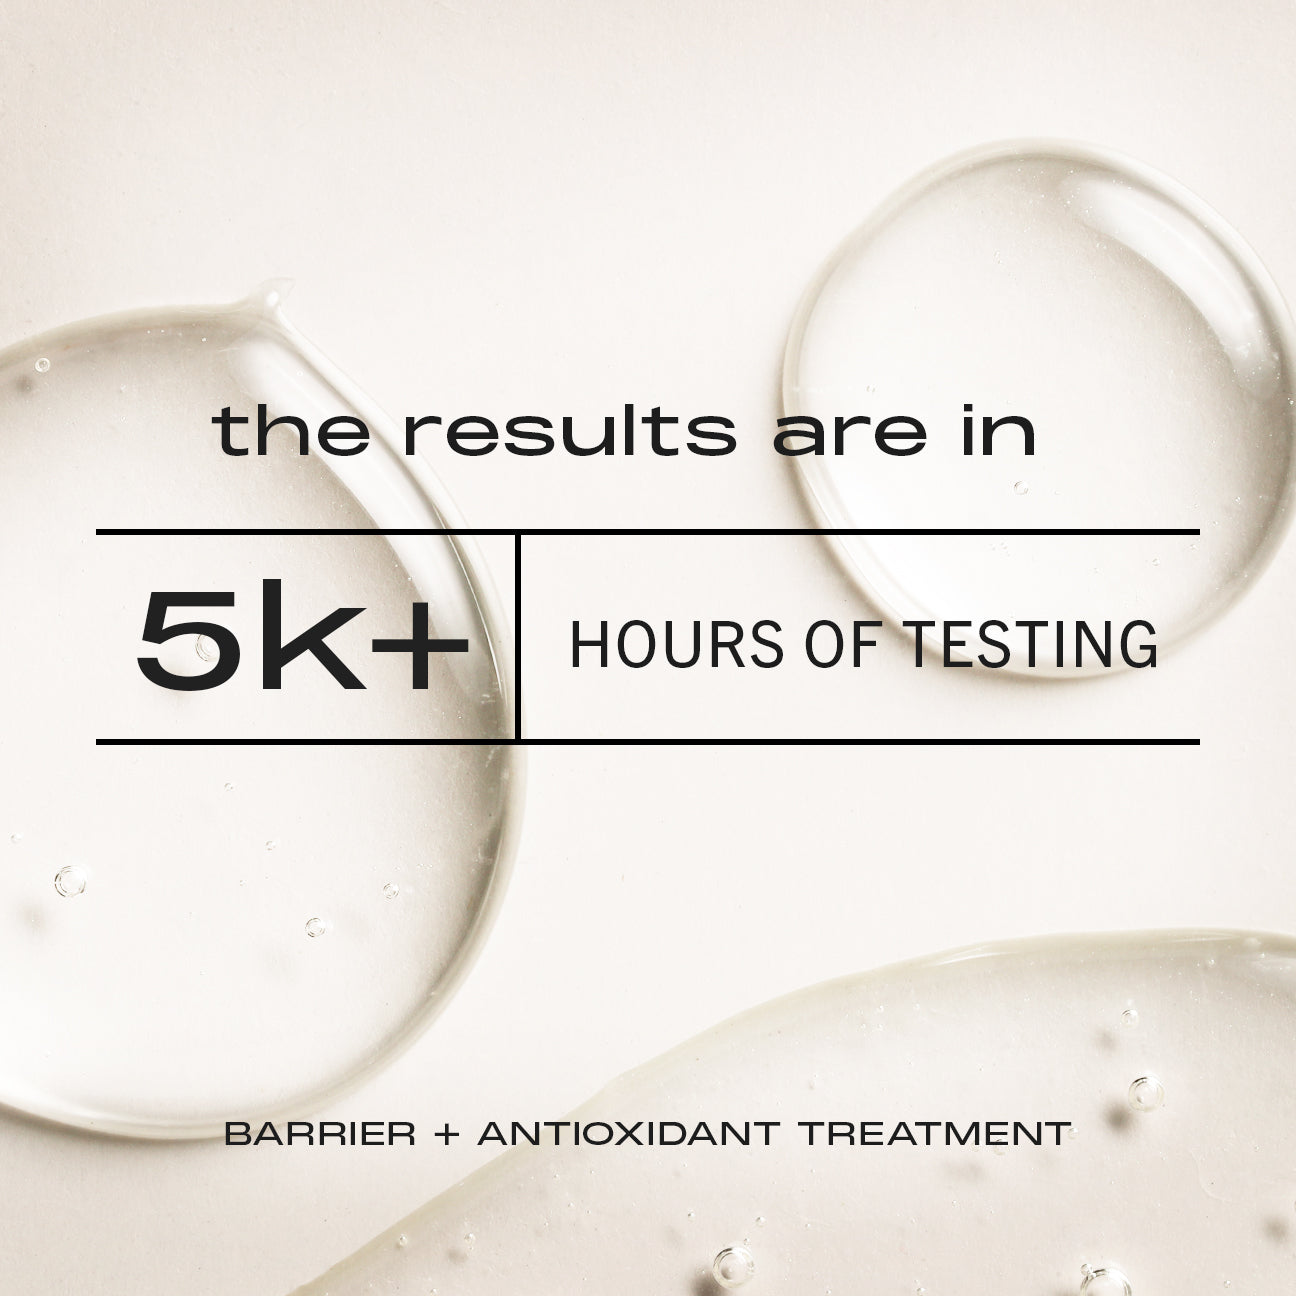 Image with text on top of product texture shot. Text says "the results are in. 5k+ hours of testing" for MATTER OF FACT product BARRIER AND ANTIOXIDANT TREATMENT